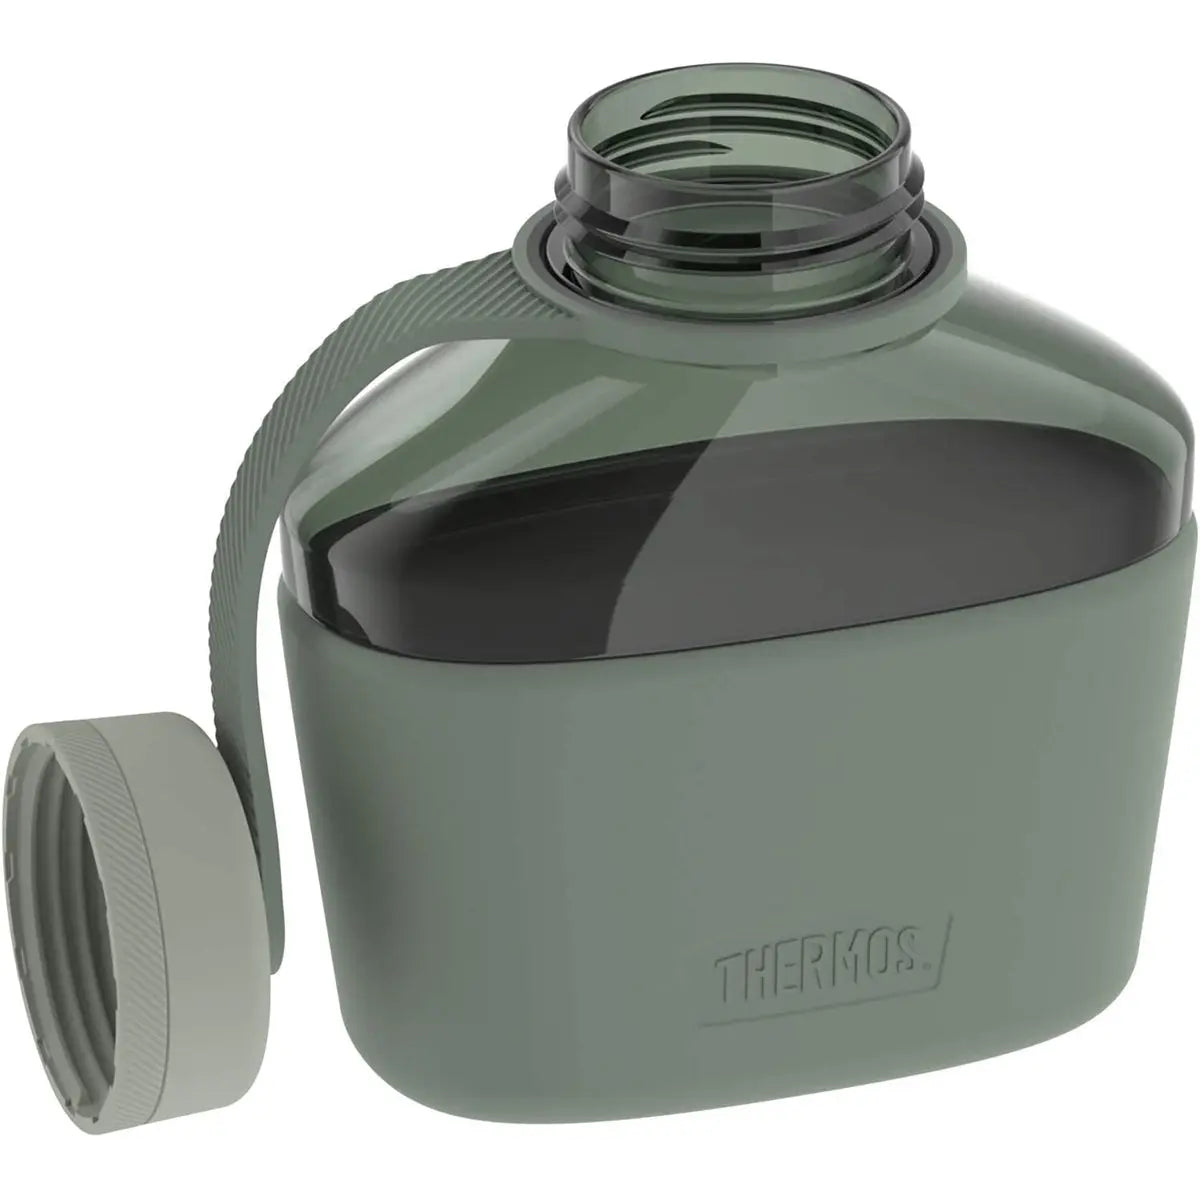 Thermos 32 oz. Alta Hard Plastic Canteen w/ Silicone Sleeve Thermos